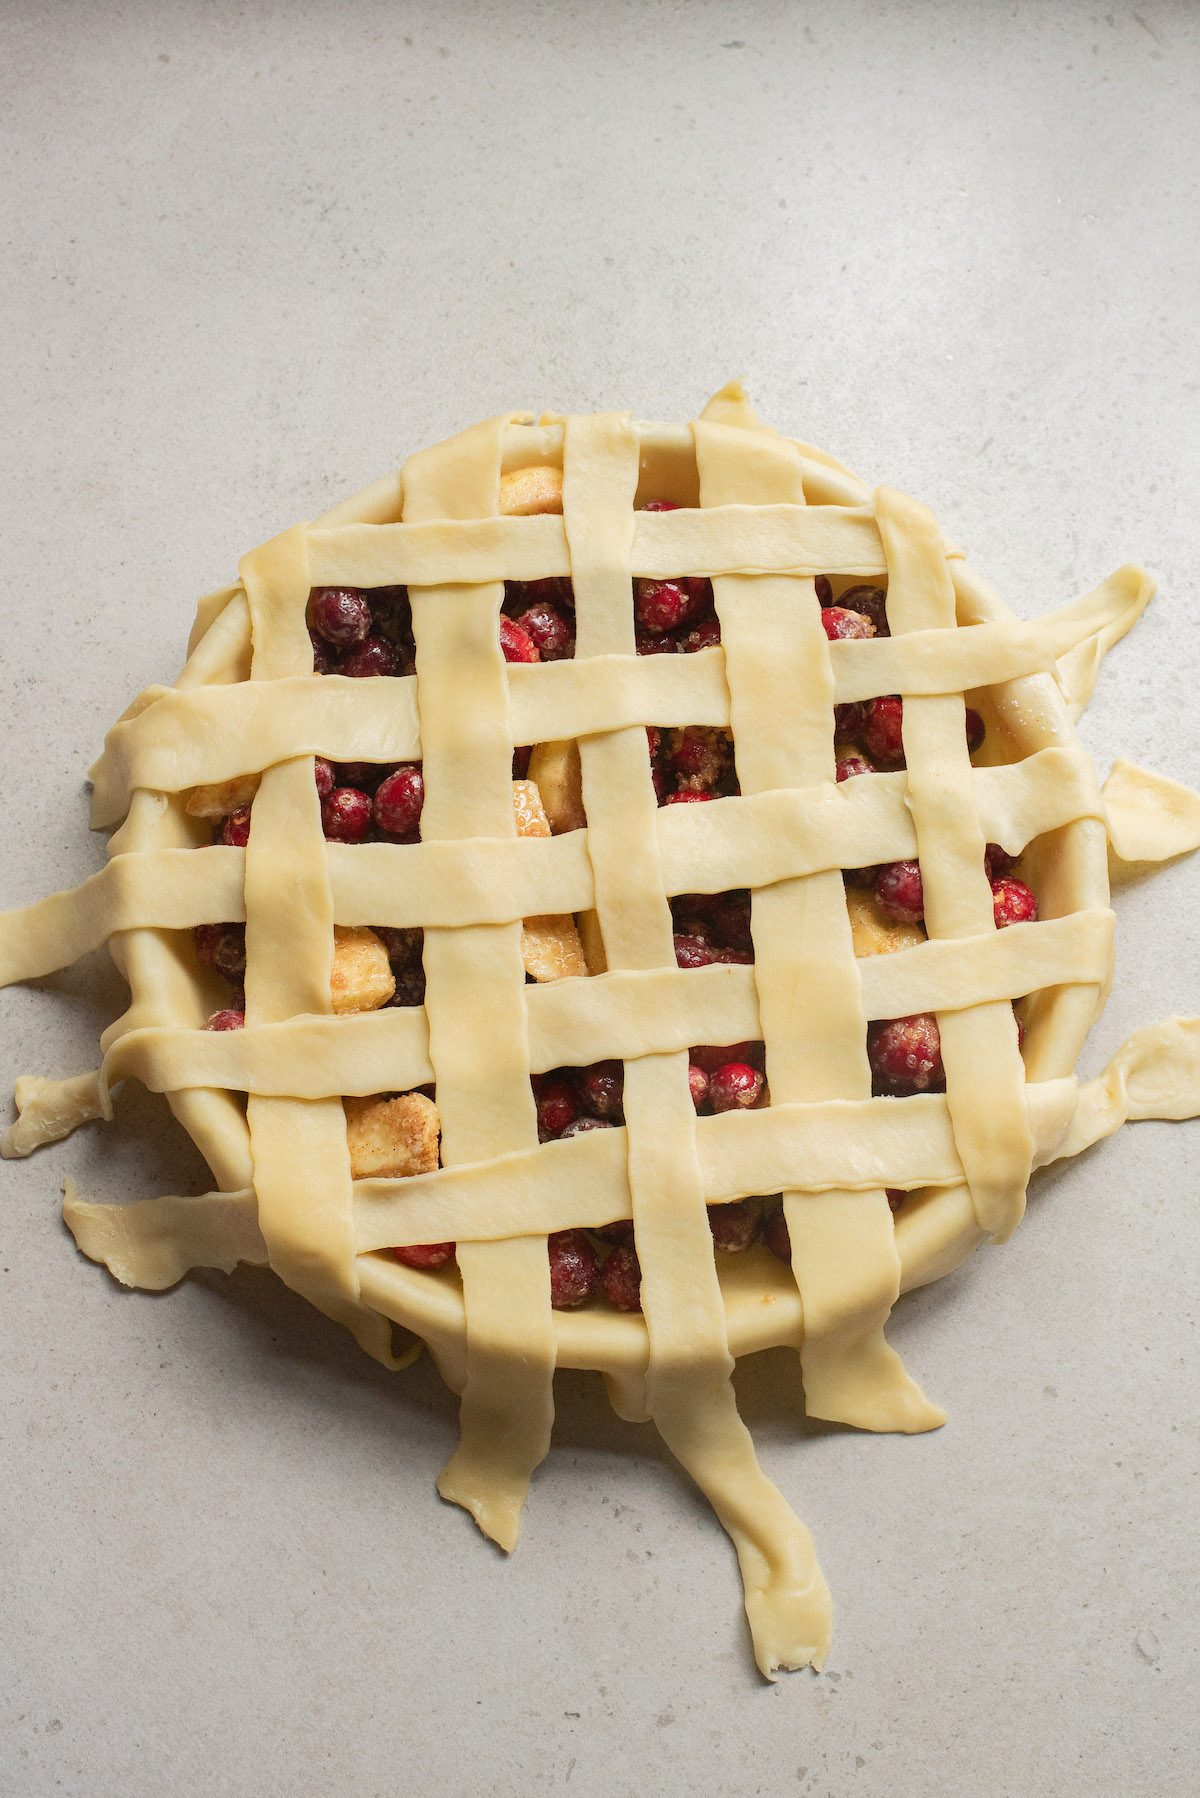 the top crust of the pie being braided into a lattice formation